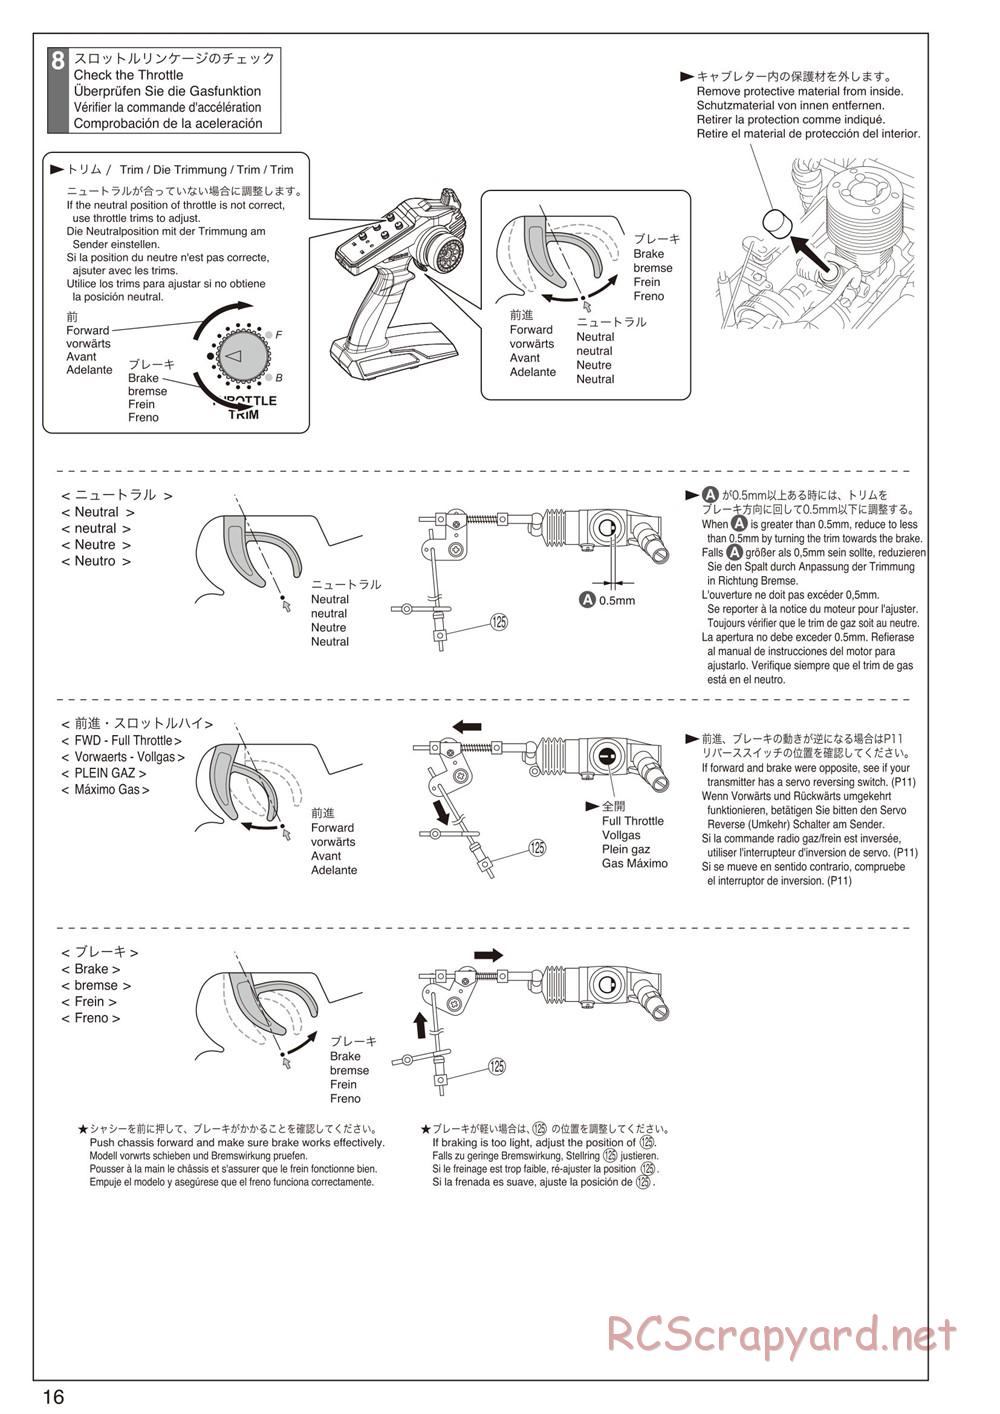 Kyosho - Mad Force Kruiser 2.0 - Manual - Page 16